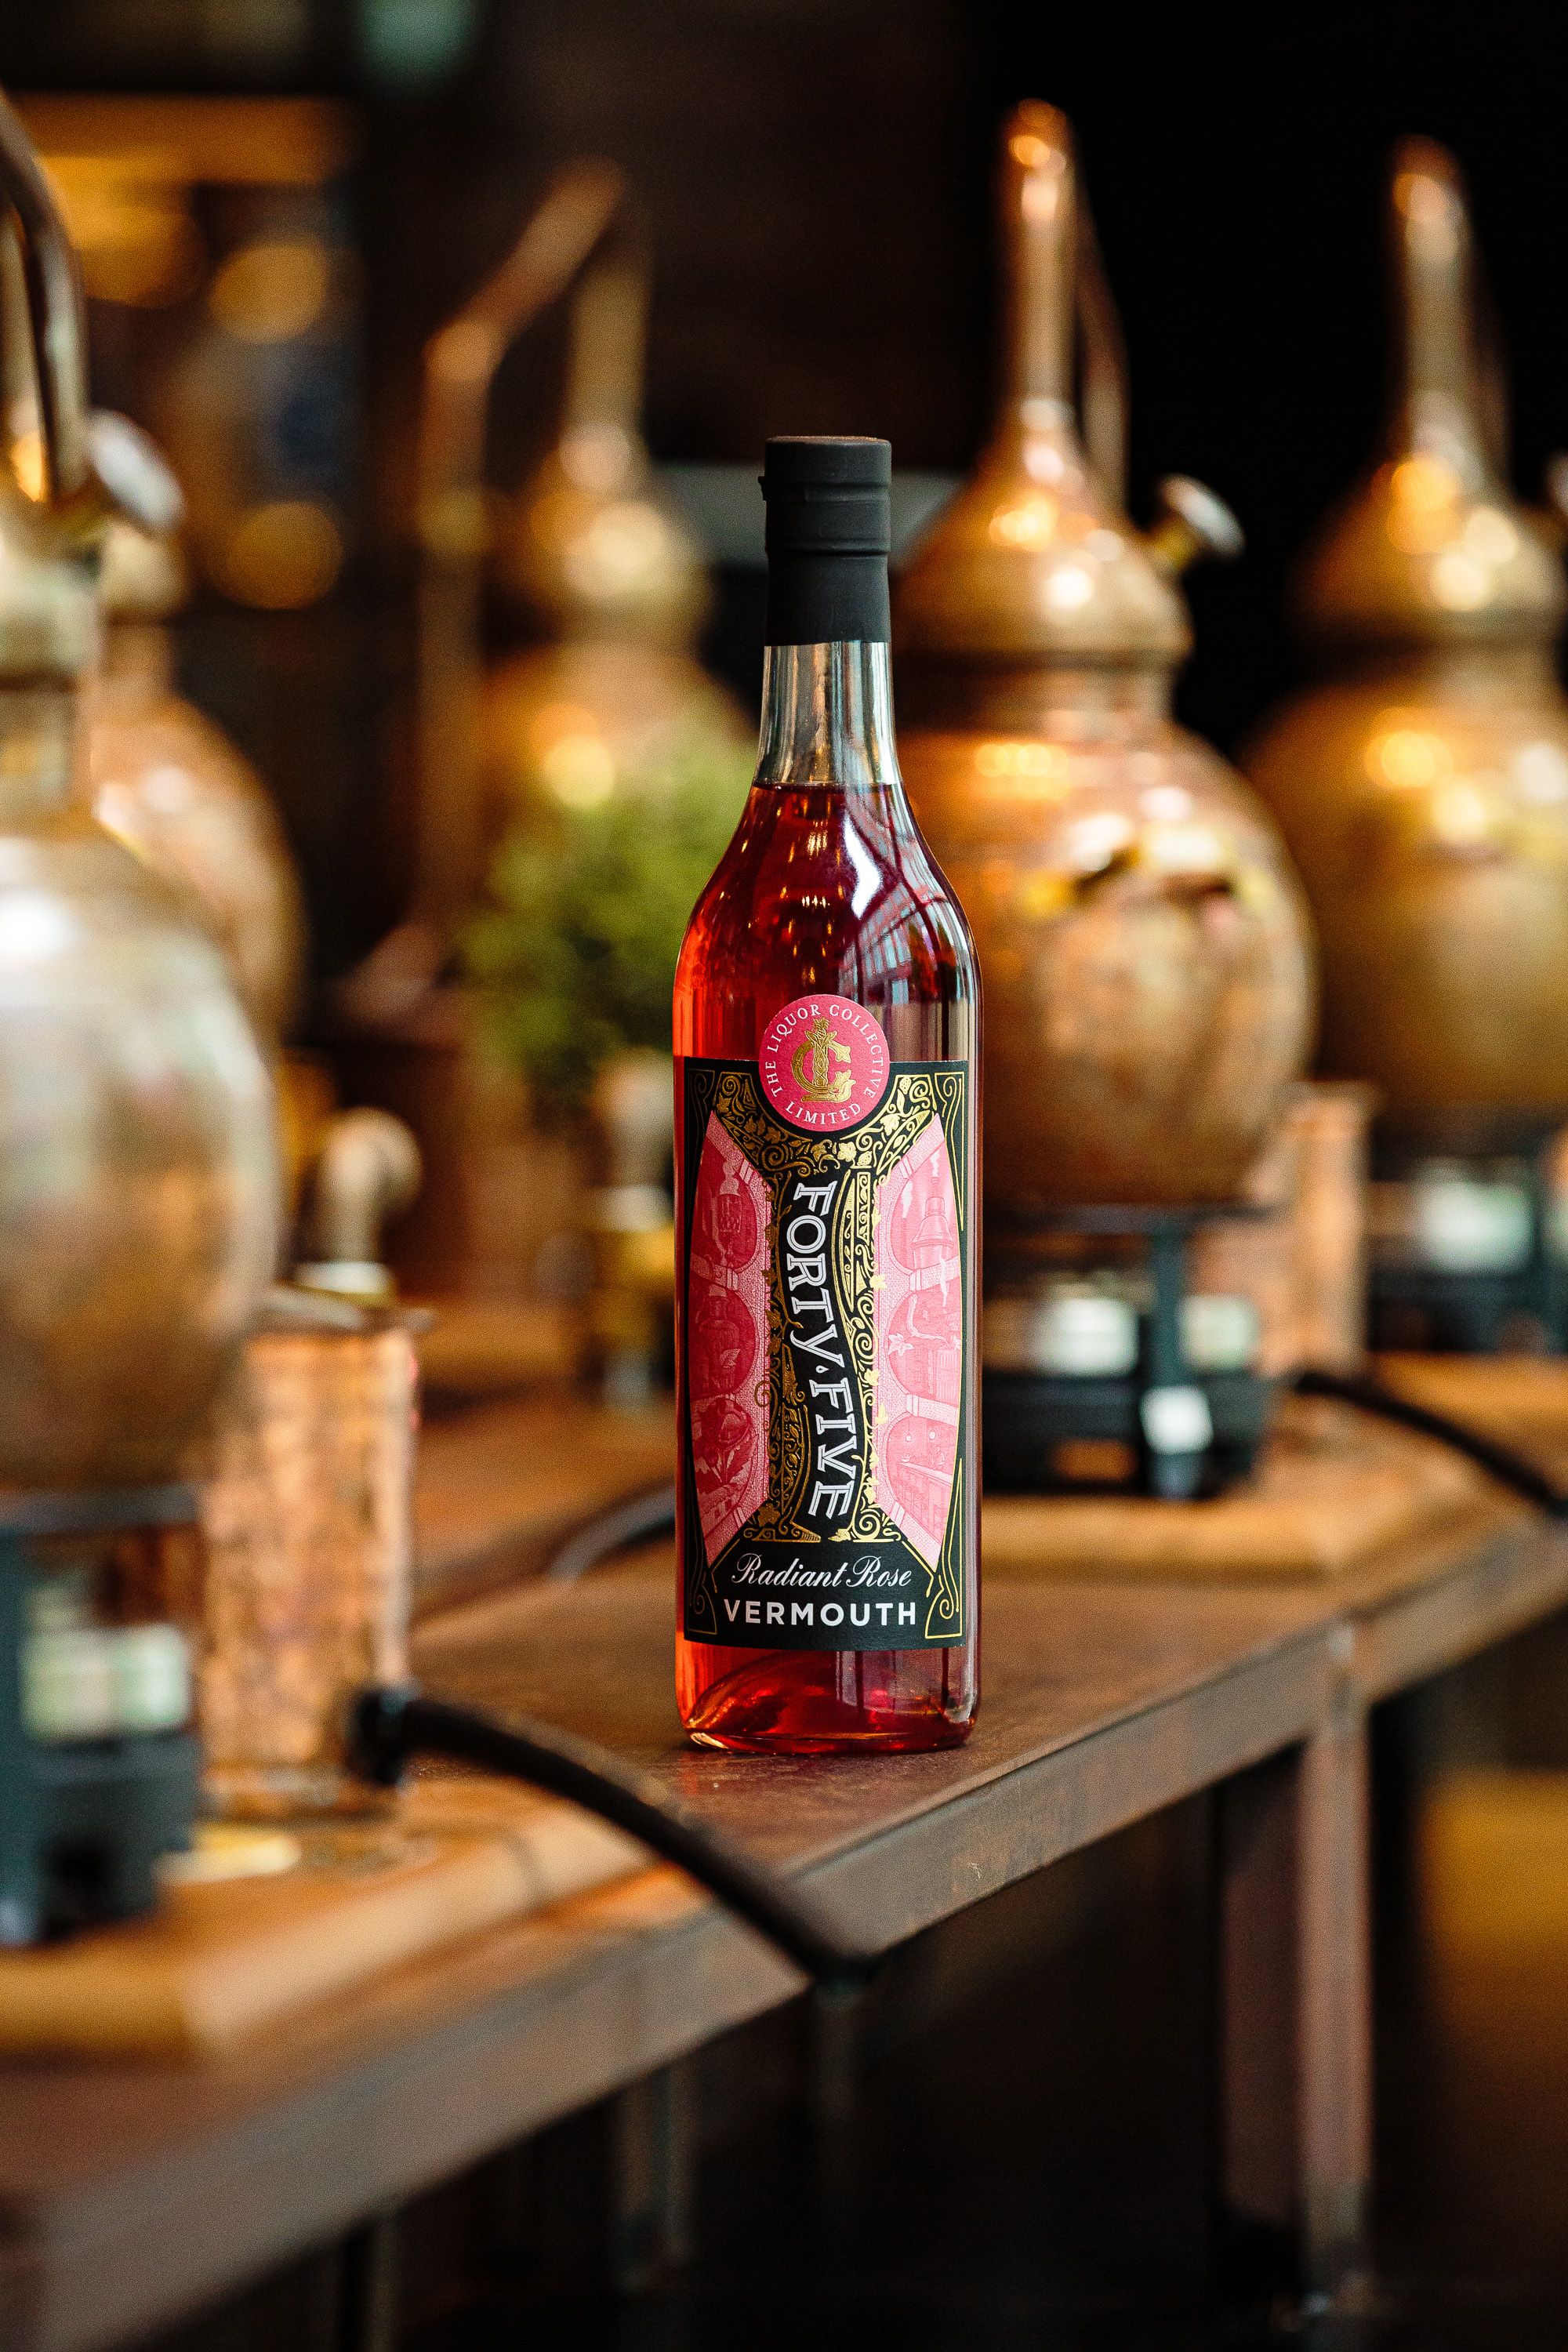 Forty-Five English Vermouth - Radiant Rose